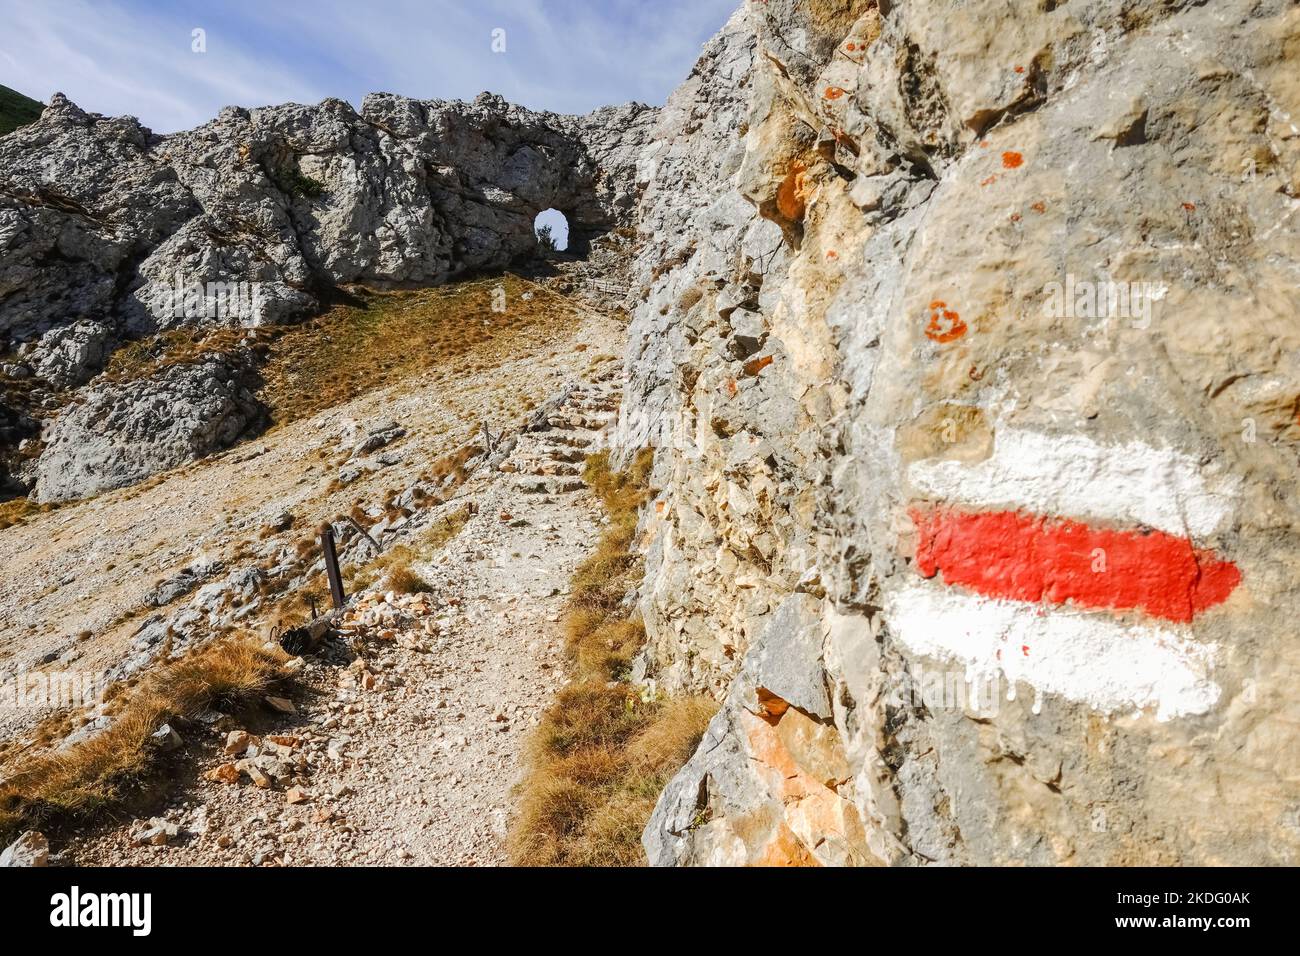 rocky round passage on a hiking path during hiking in austria Stock Photo